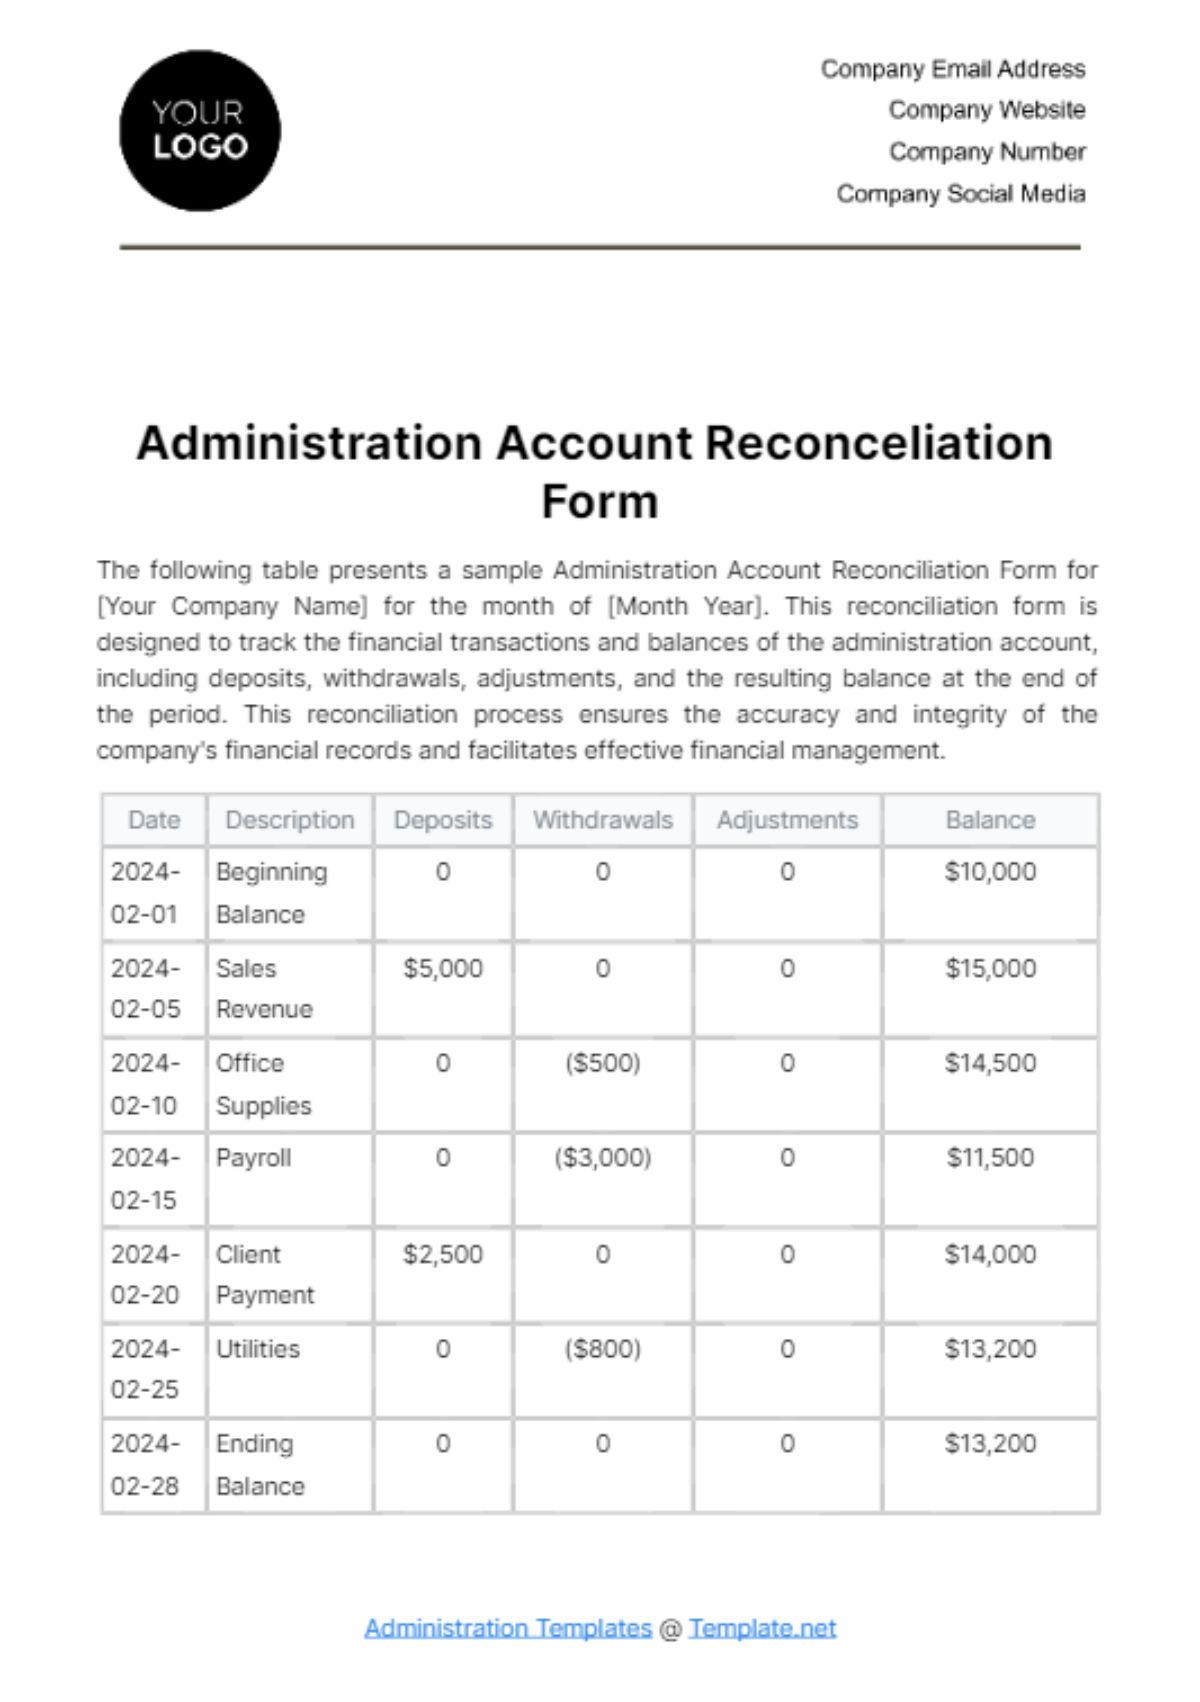 Administration Account Reconciliation Form Template